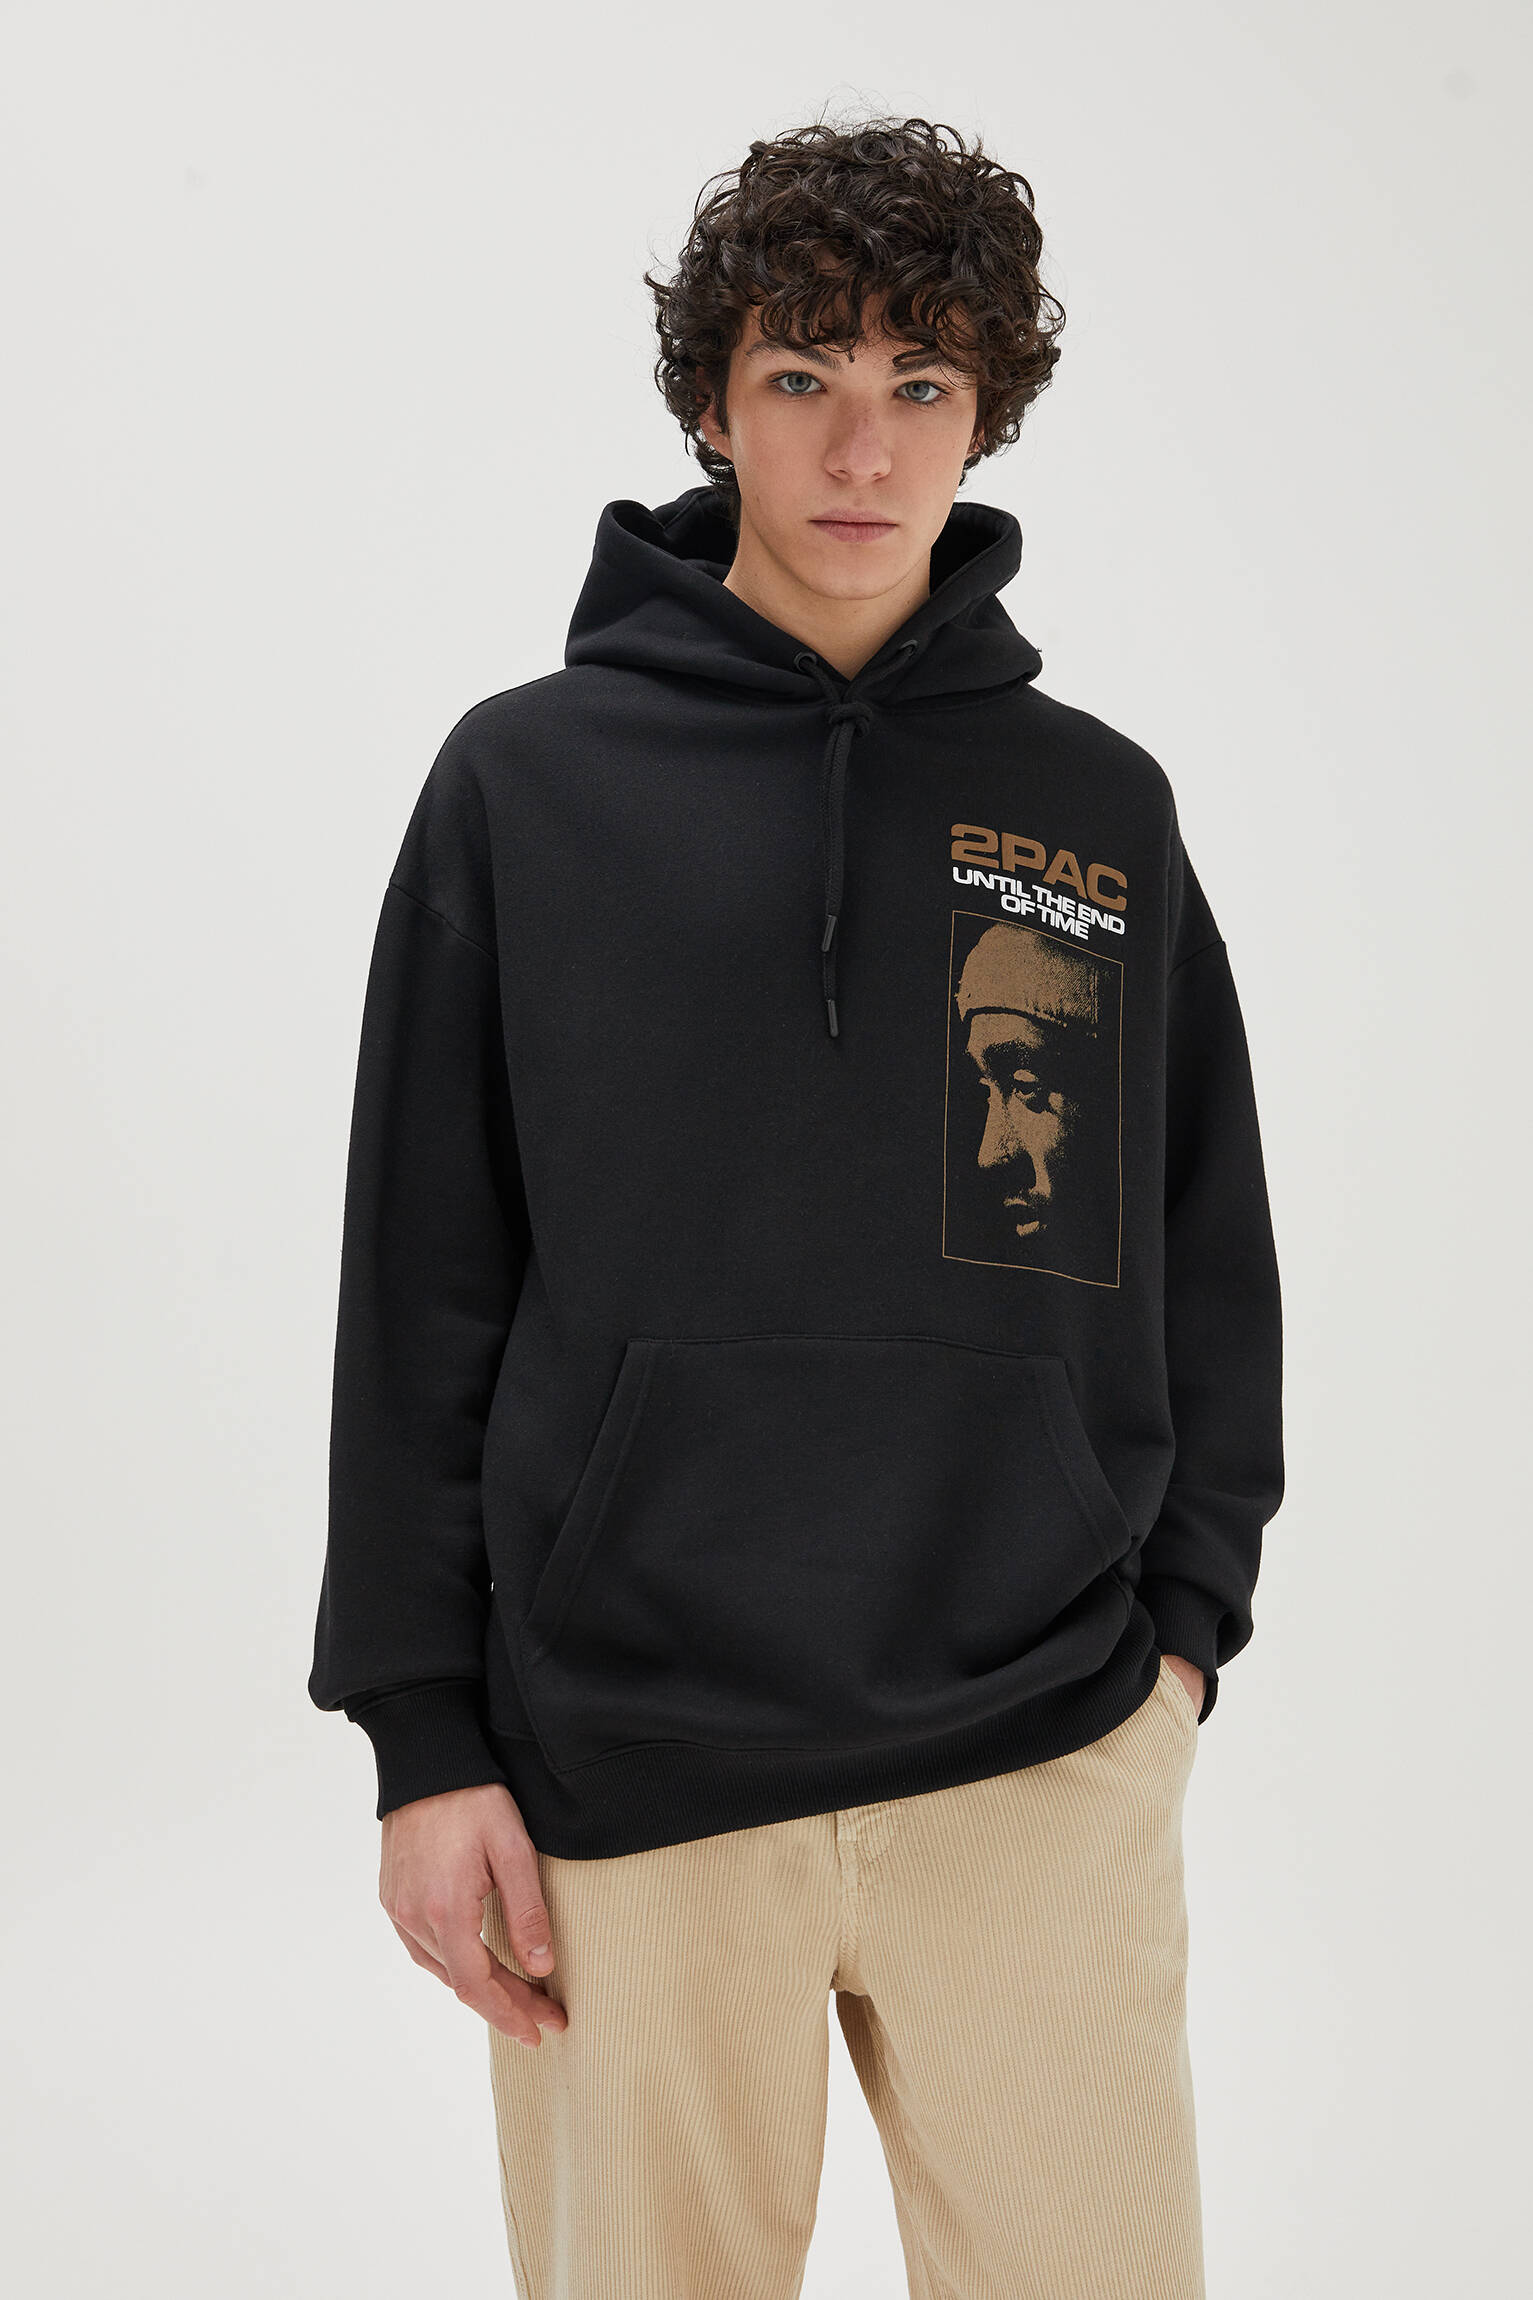 Pull & Bear - Tupac “Until The End Of Time” hoodie